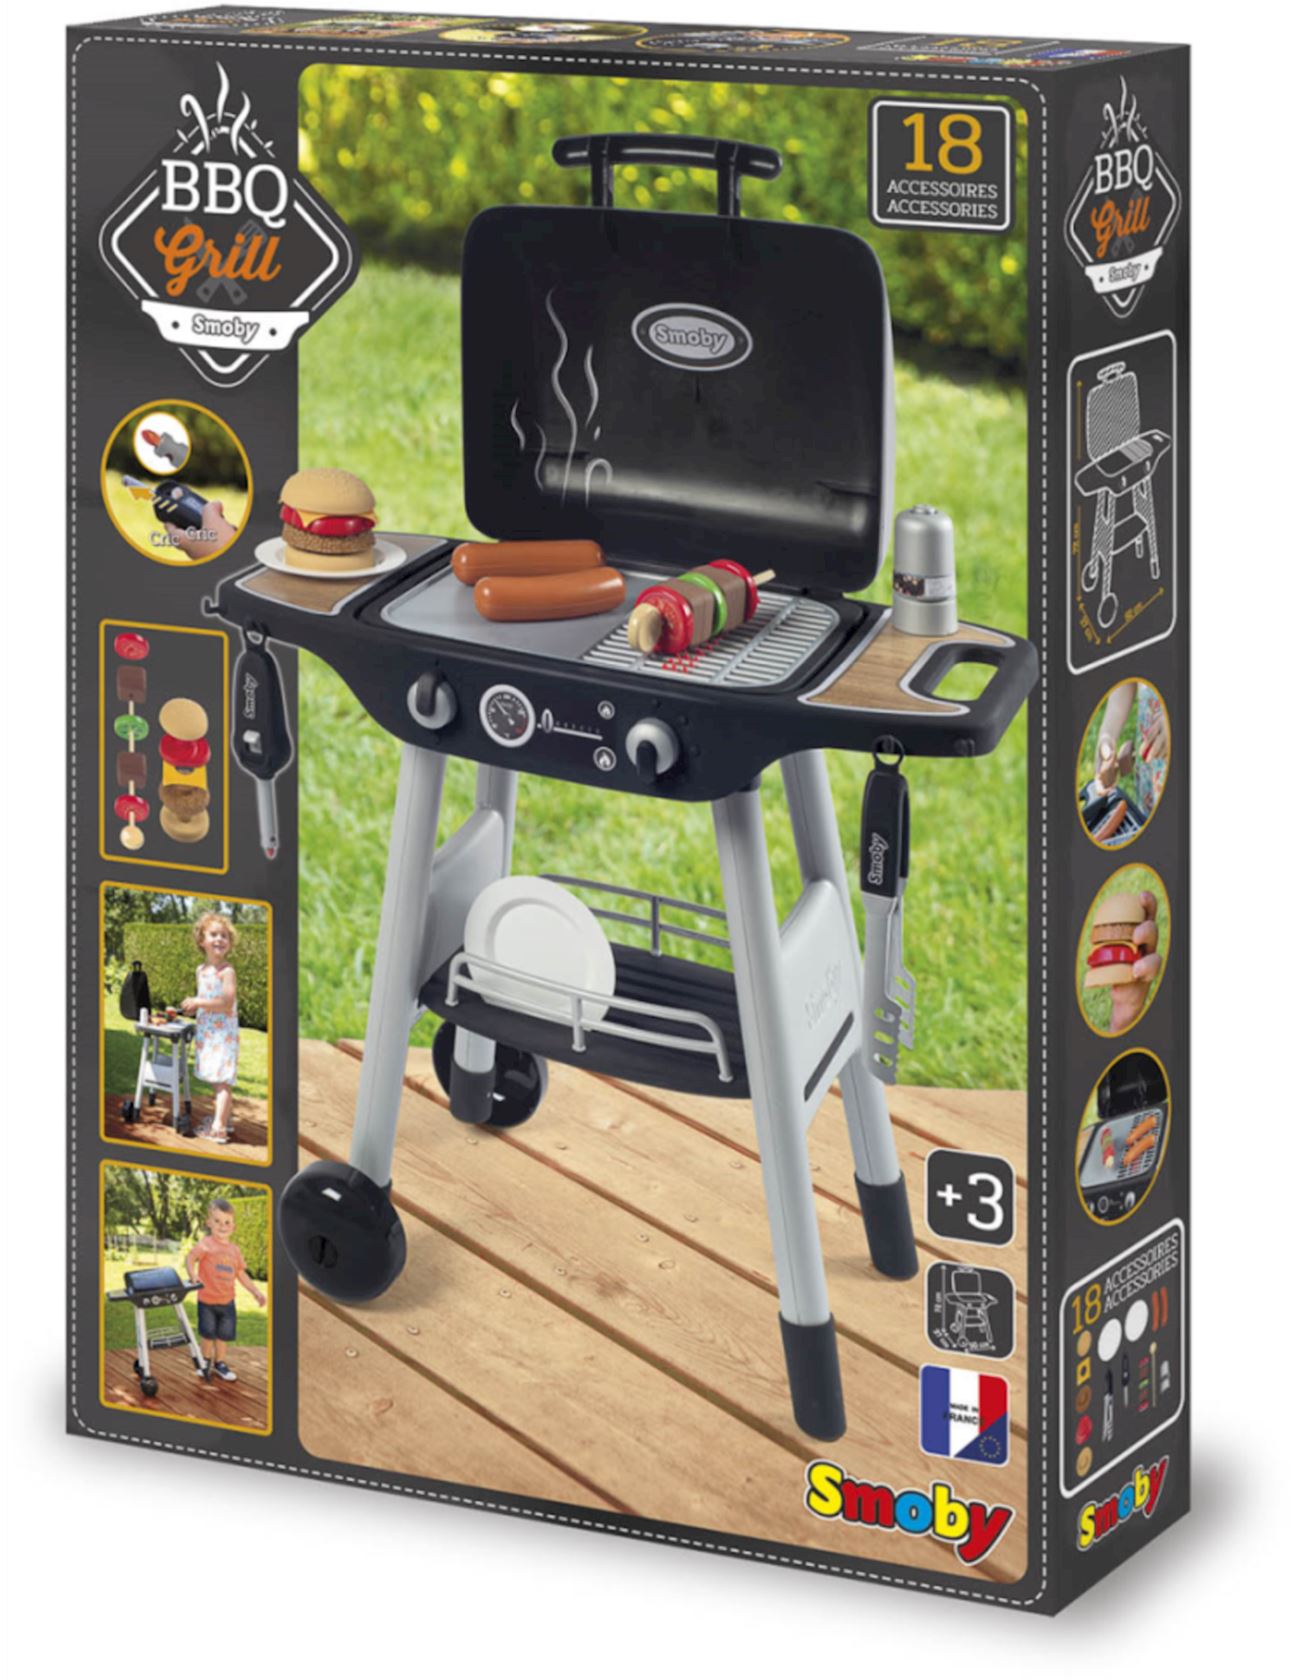 Smoby-Kids-barbecue-grill-incl-18-accessoires